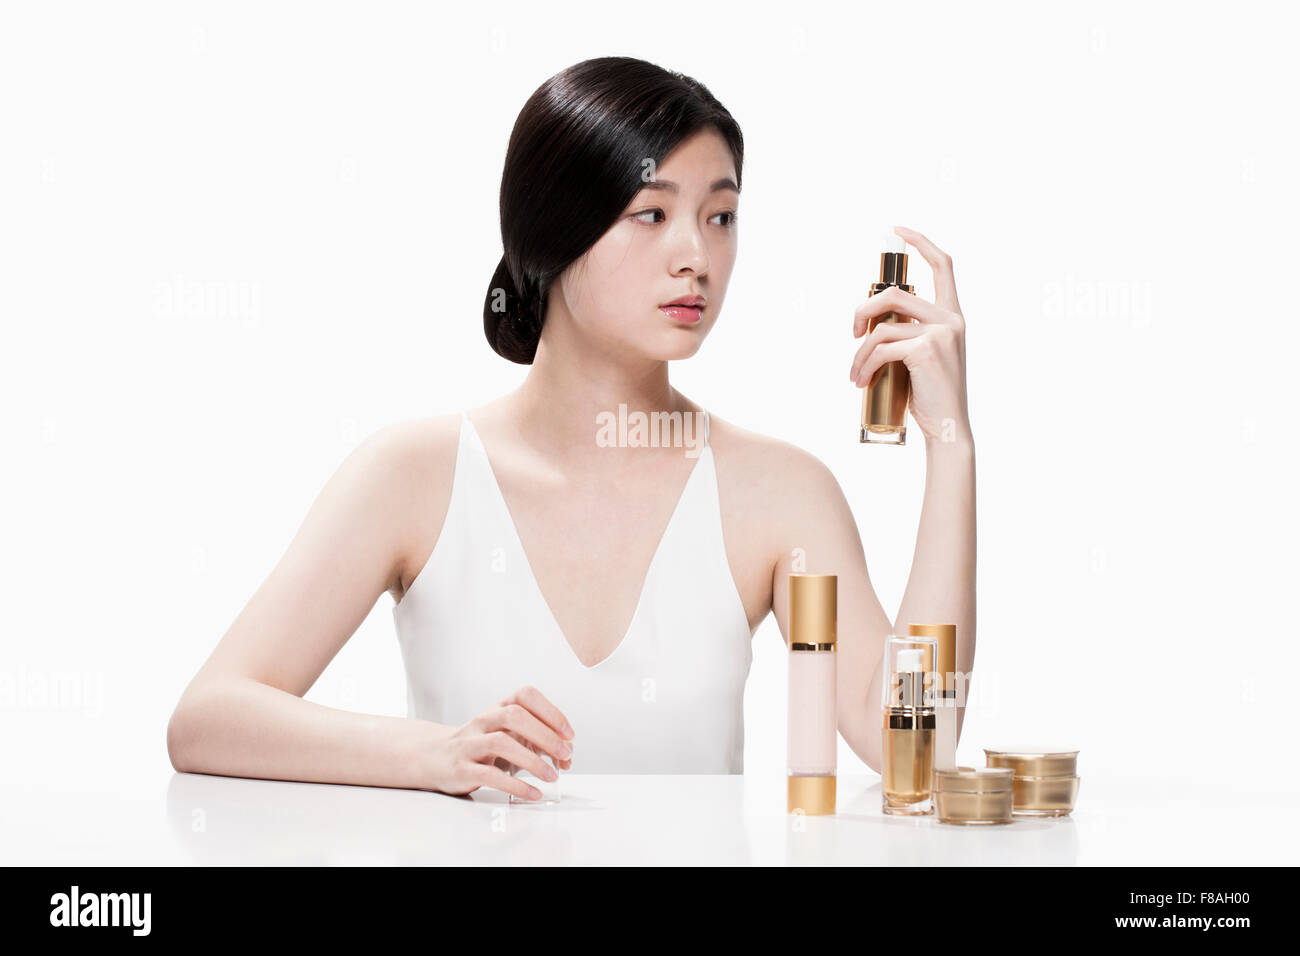 Woman seated at the table holding a skincare product with one hand and staring at the product Stock Photo